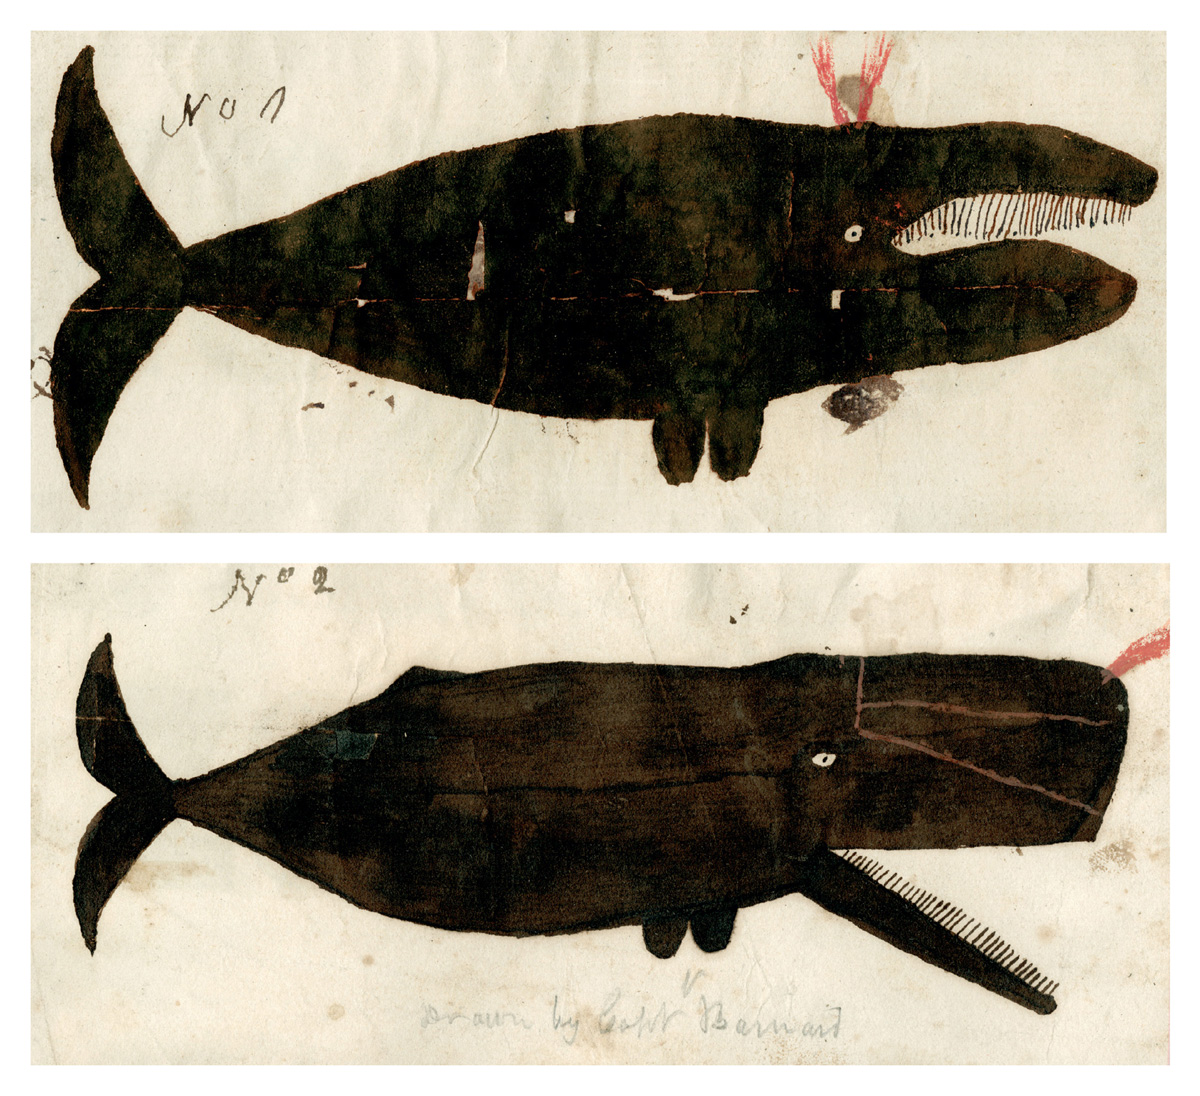 Captain Valentine Barnard’s depiction of a right (or perhaps a bowhead) whale (top) and of a sperm whale (bottom), ca. 1810. Courtesy the Collection of the New-York Historical Society (PR-145 #76, detail).